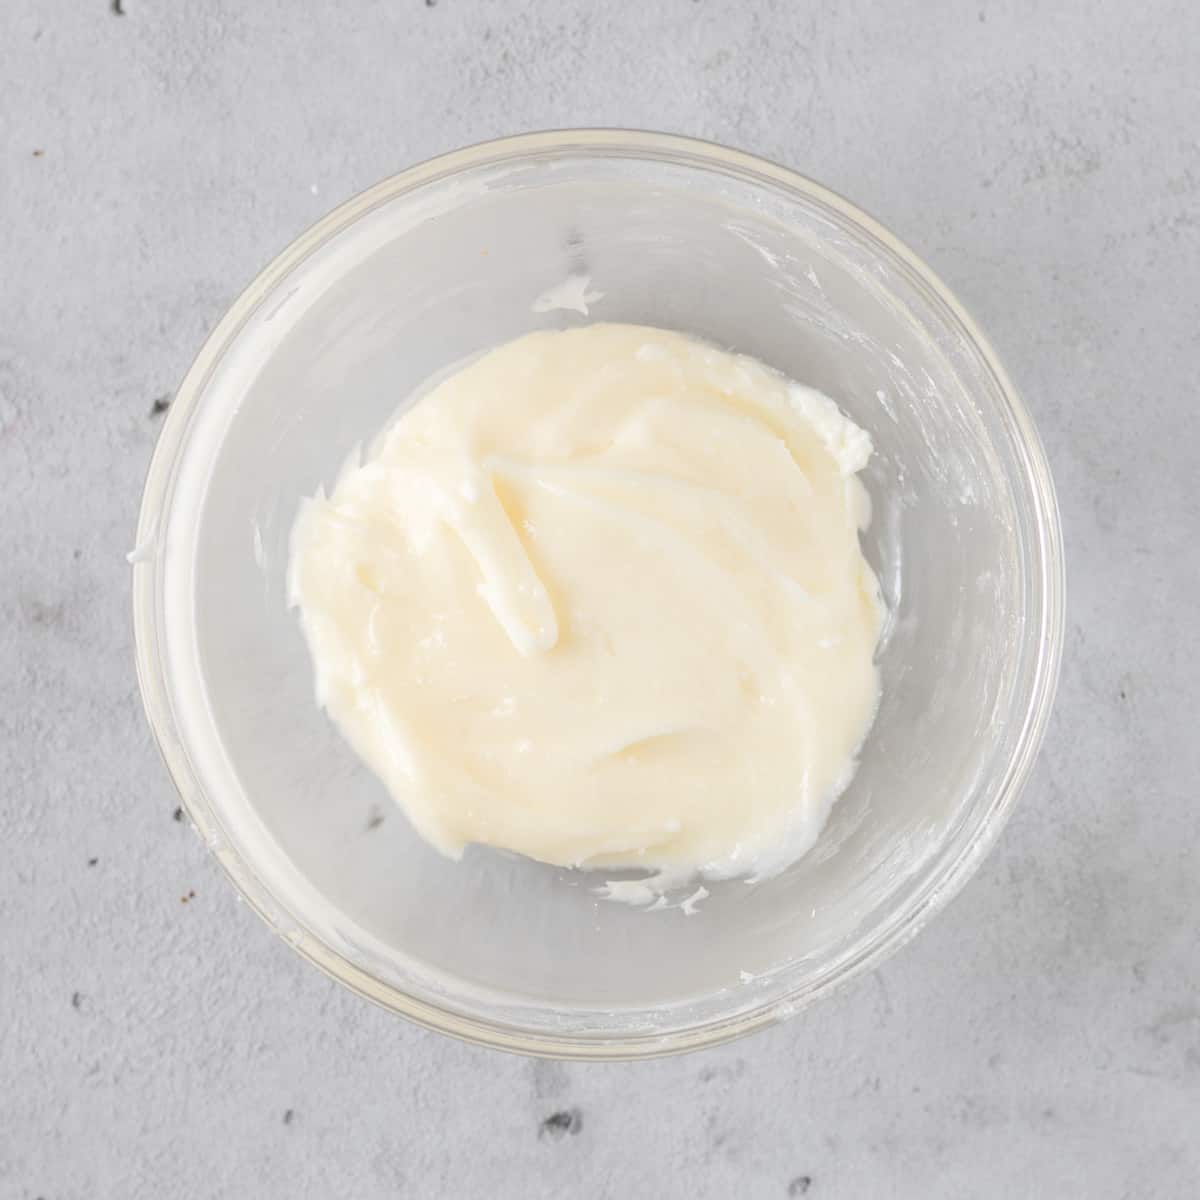 the cream cheese icing in a glass bowl on a grey background.